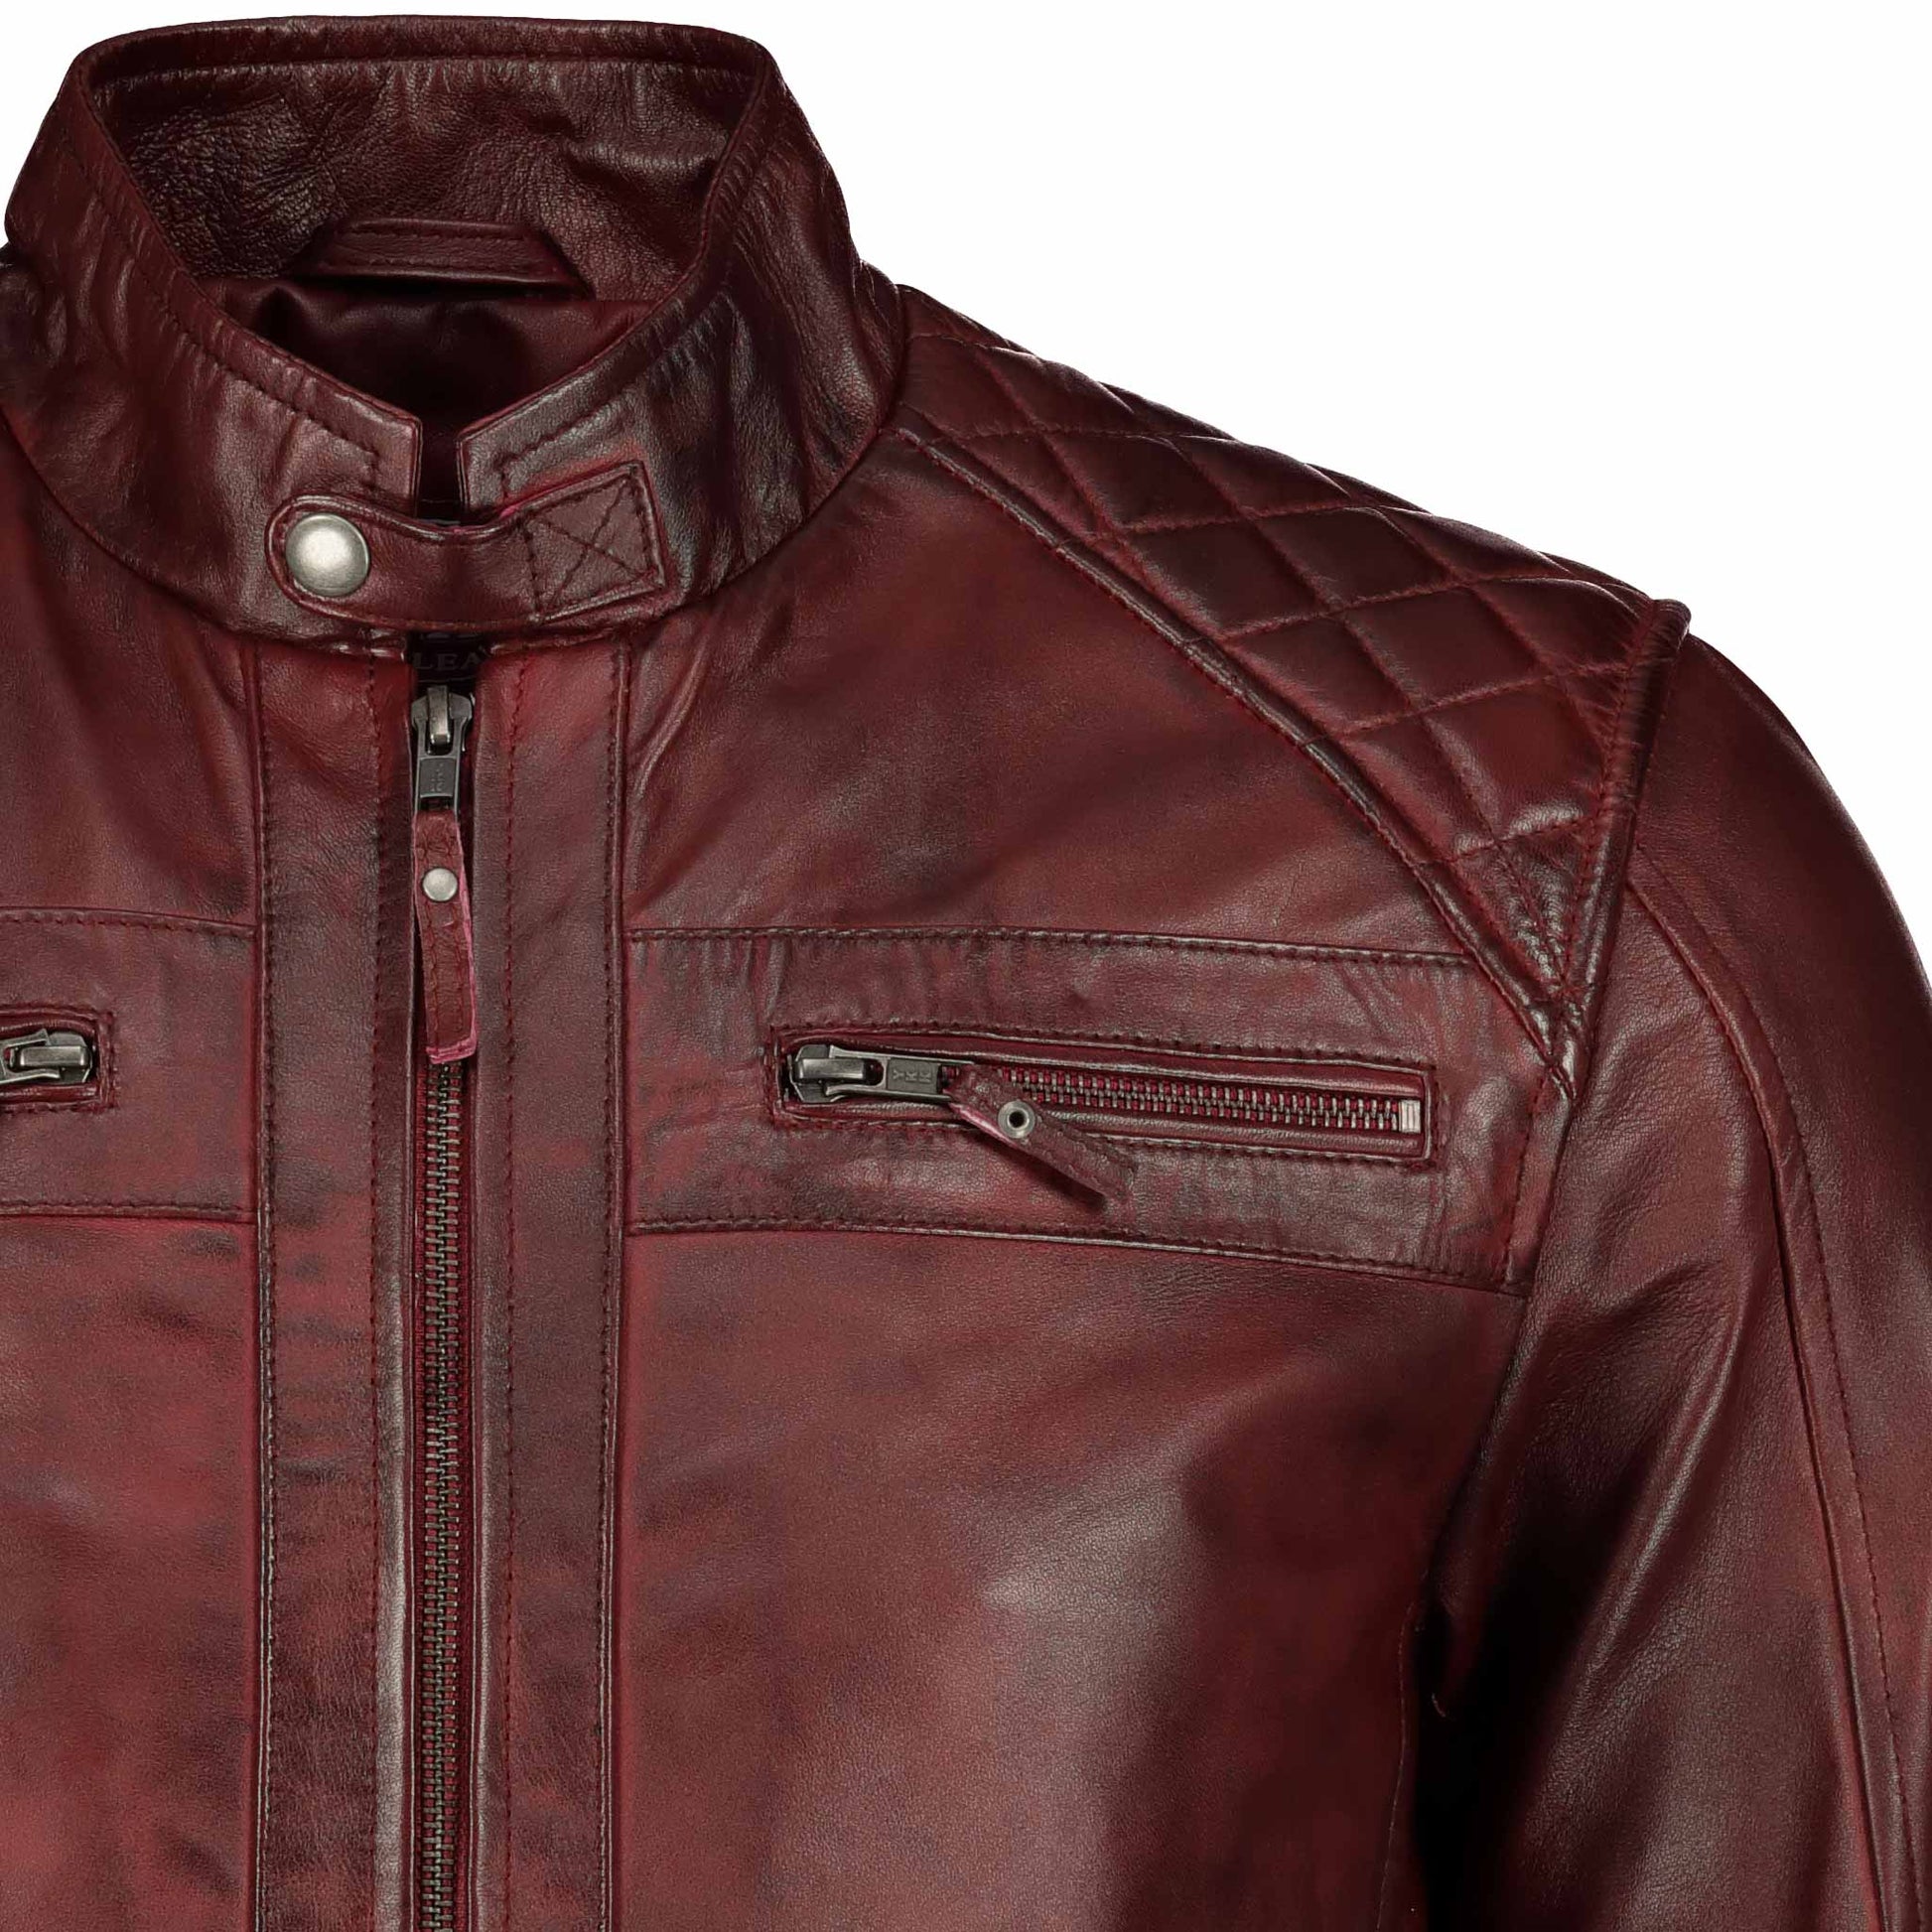 Elite Slim Fit Leather Jacket (Ox Red)- Supreme Leather Supreme Leather